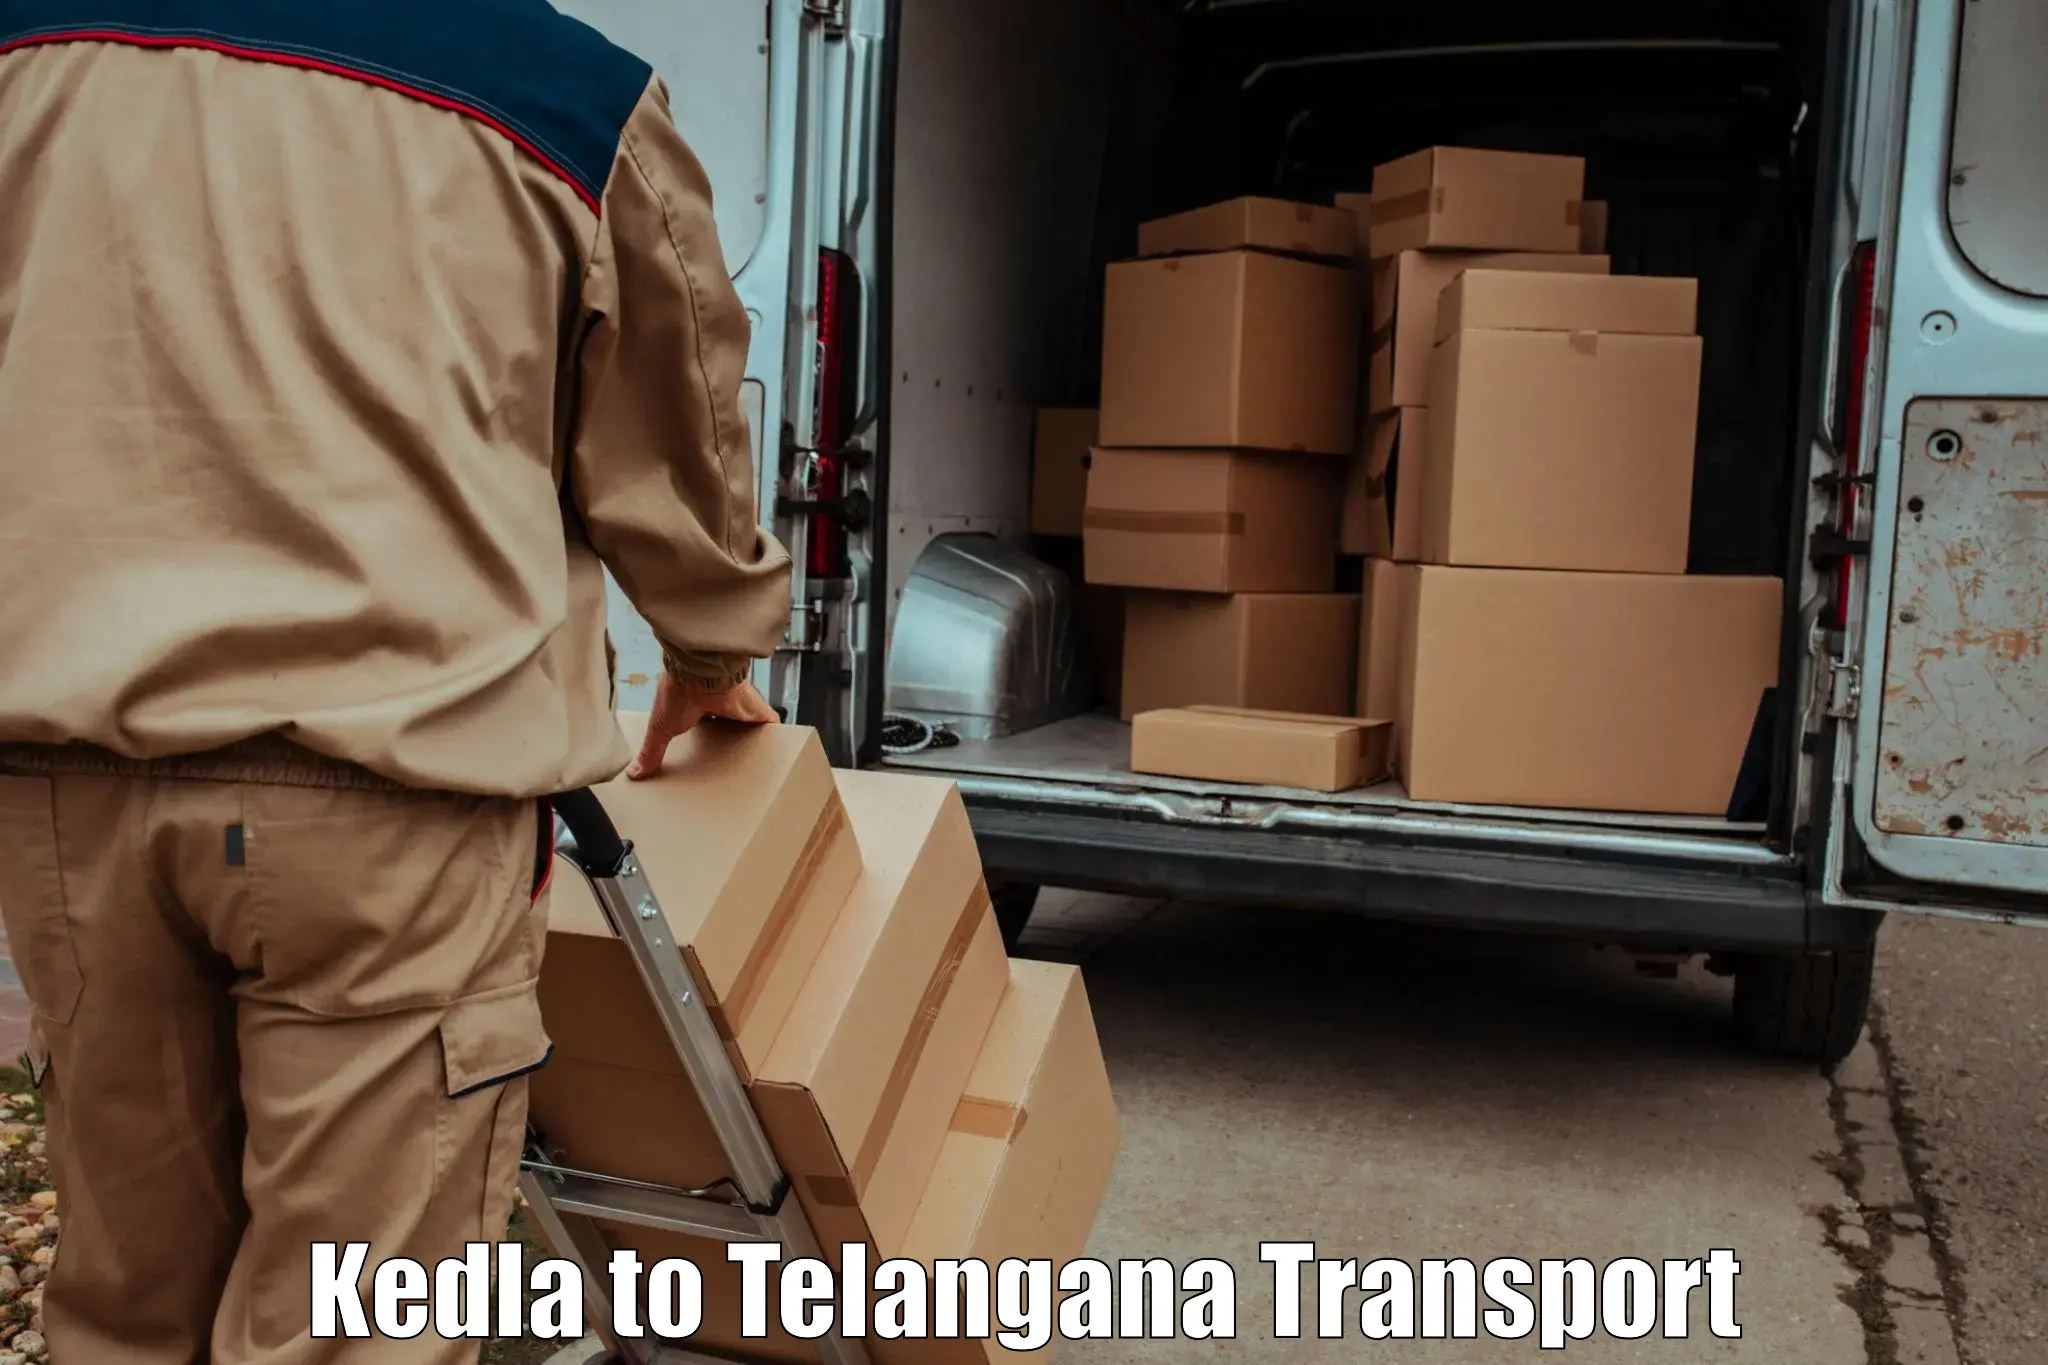 Transport shared services Kedla to Sathupally